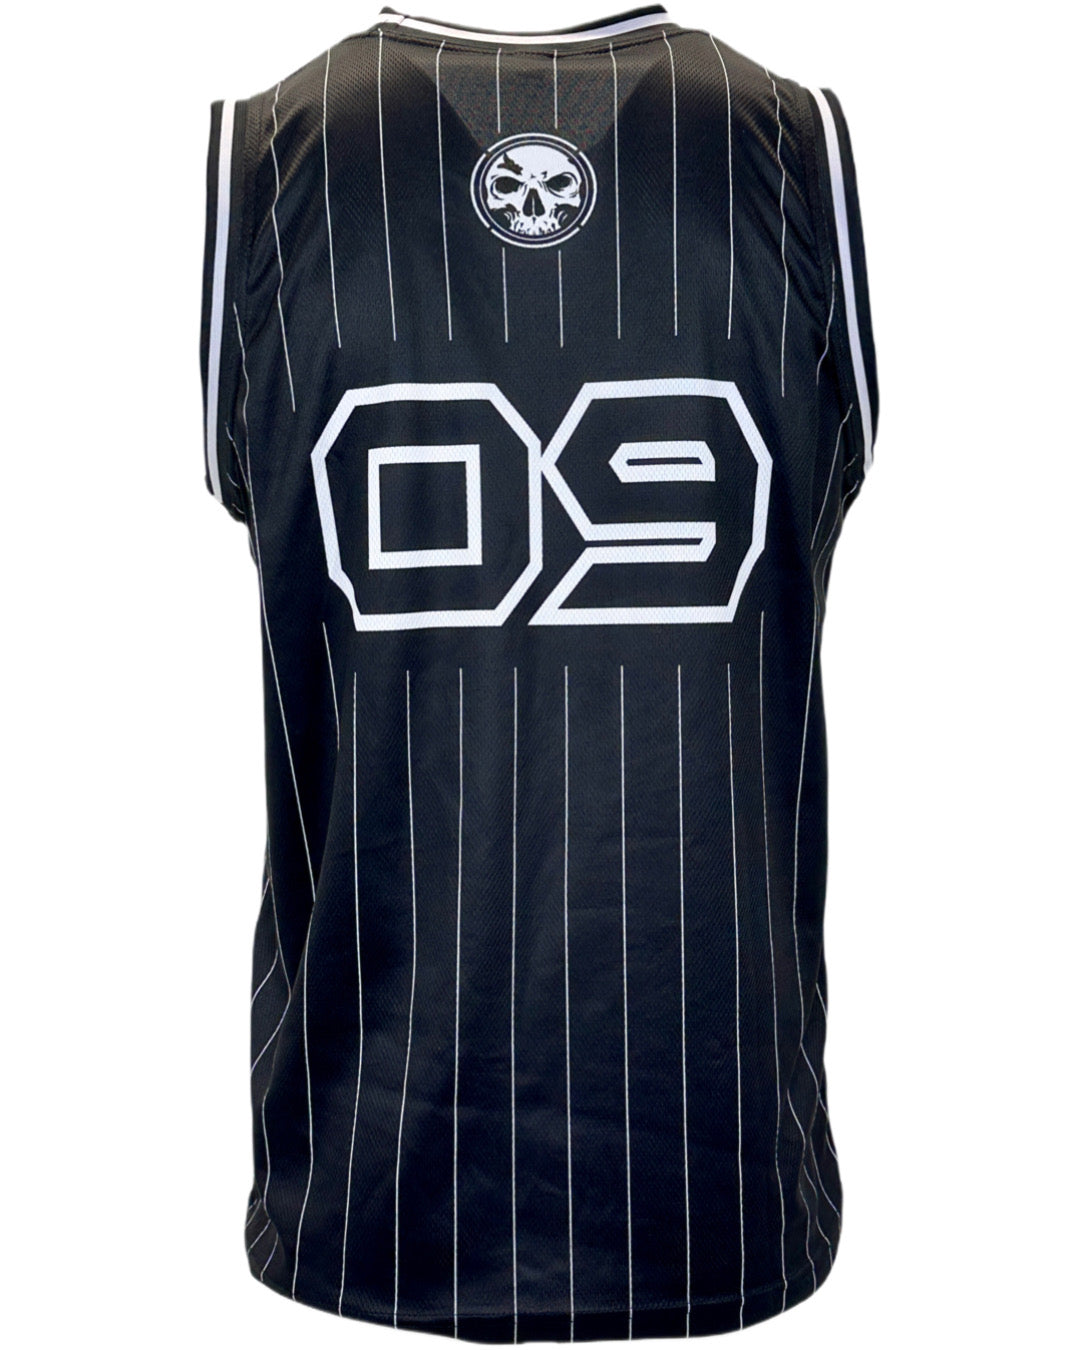 NOW AVAILABLE!  Black "09" Jersey - White Pinstripes